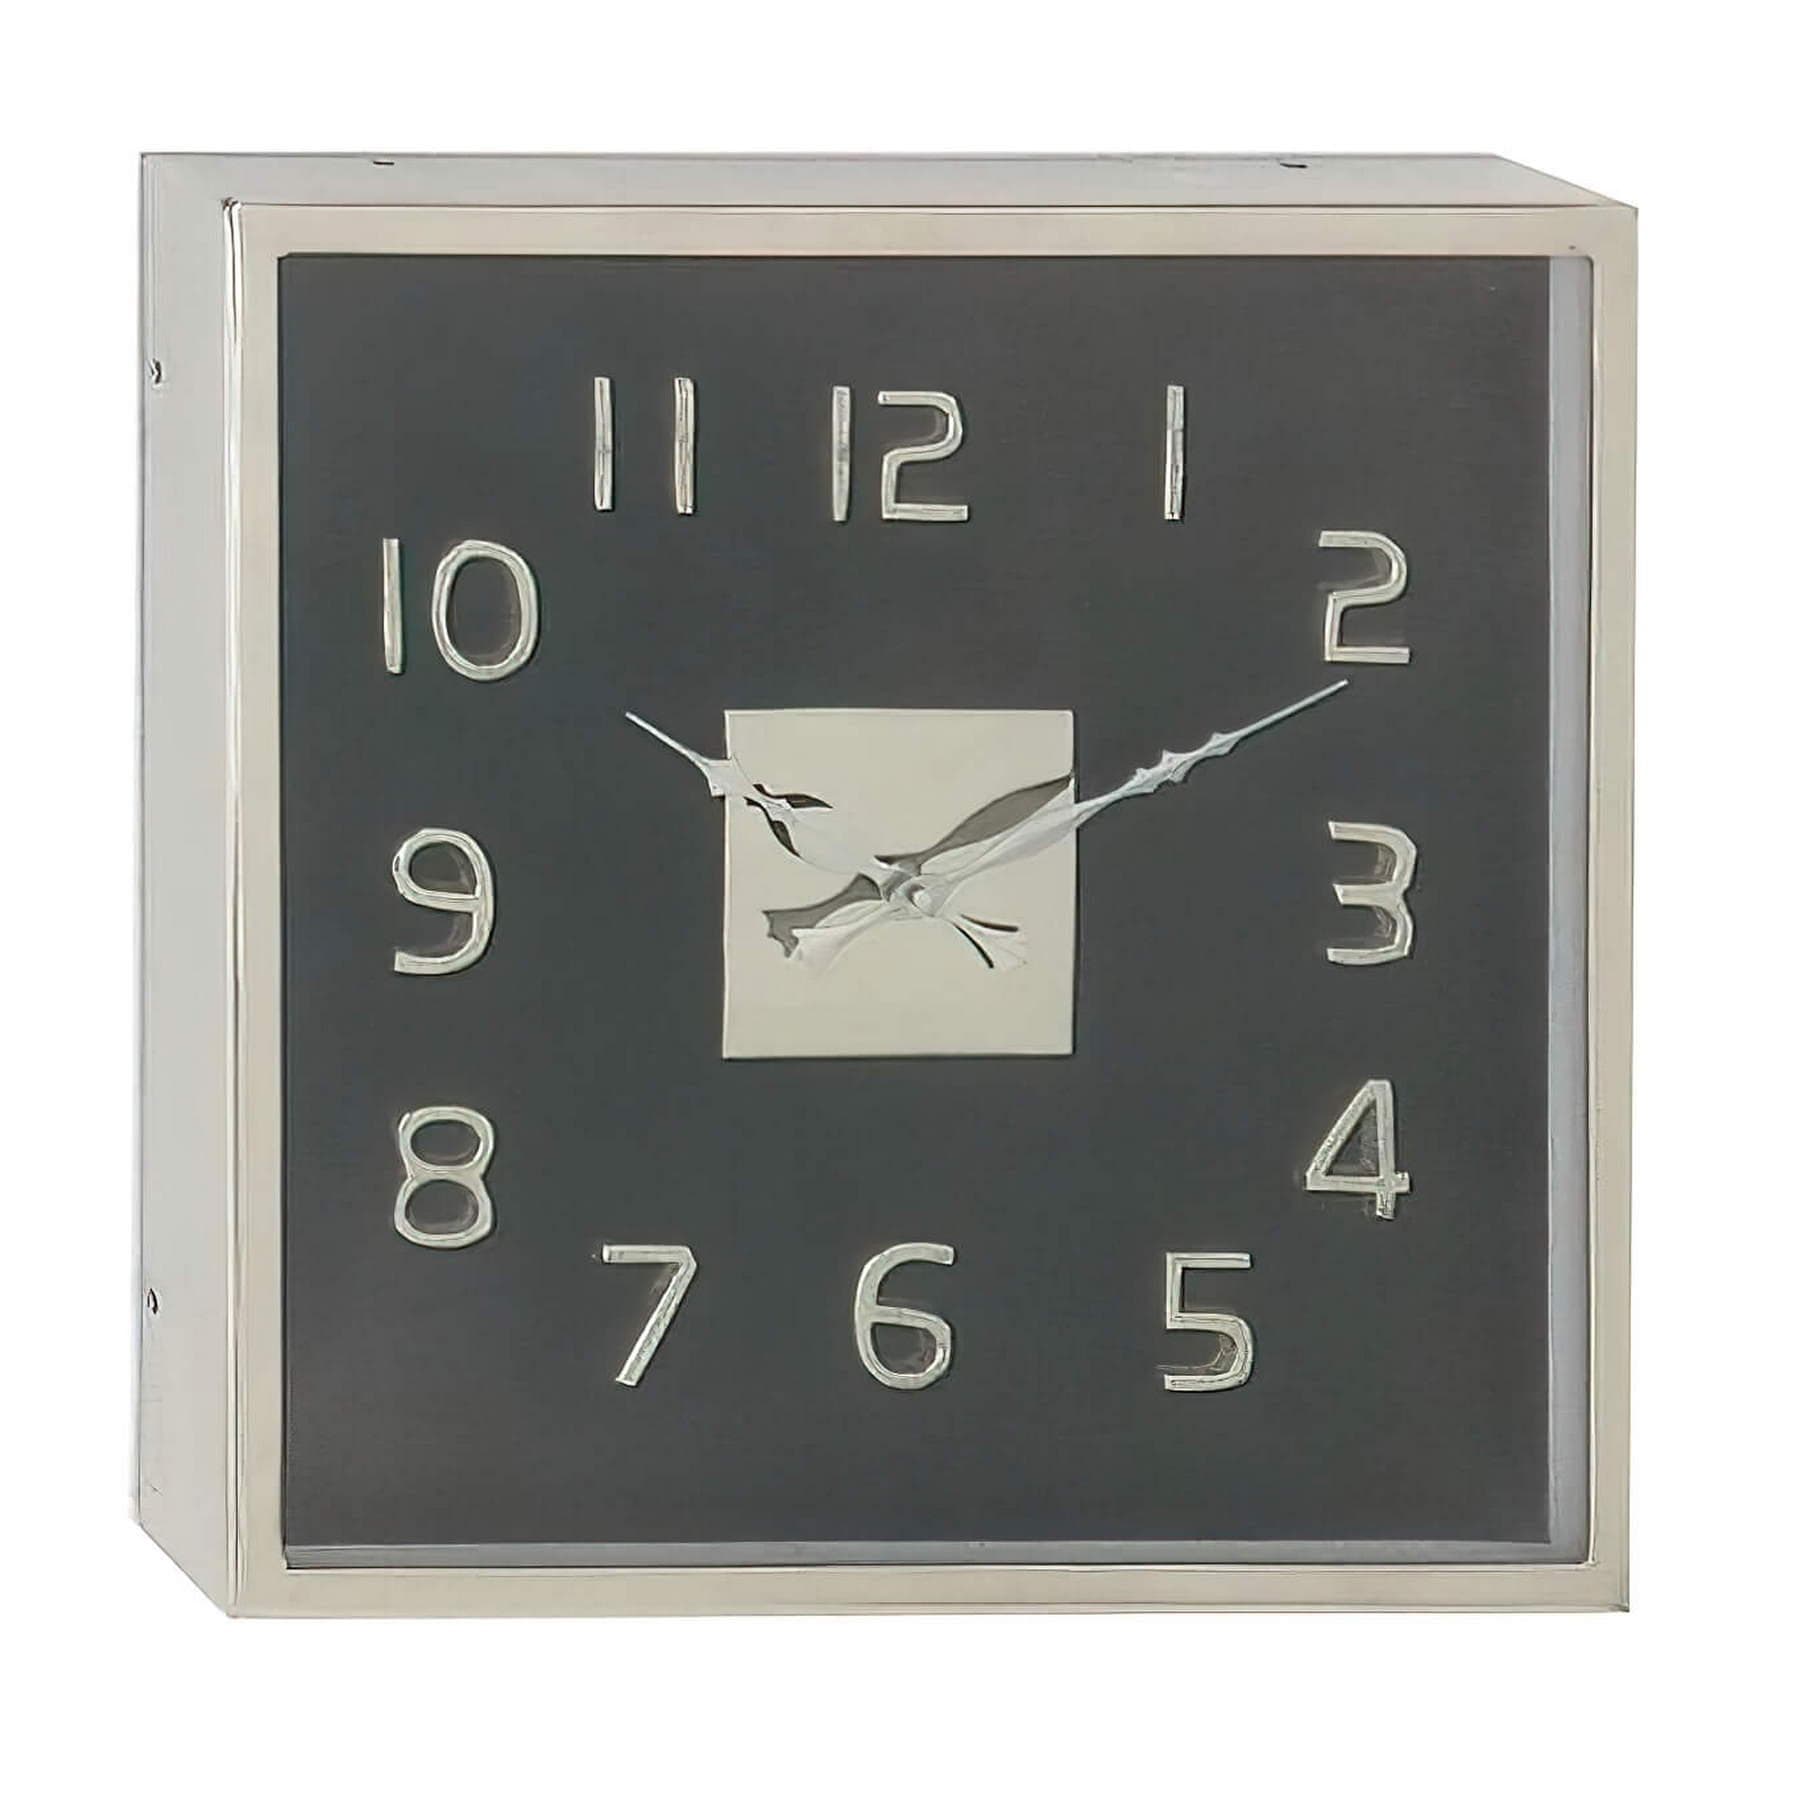 Stainless Steel Black Wall Clock Elevate Home Decor - Wall Clocks